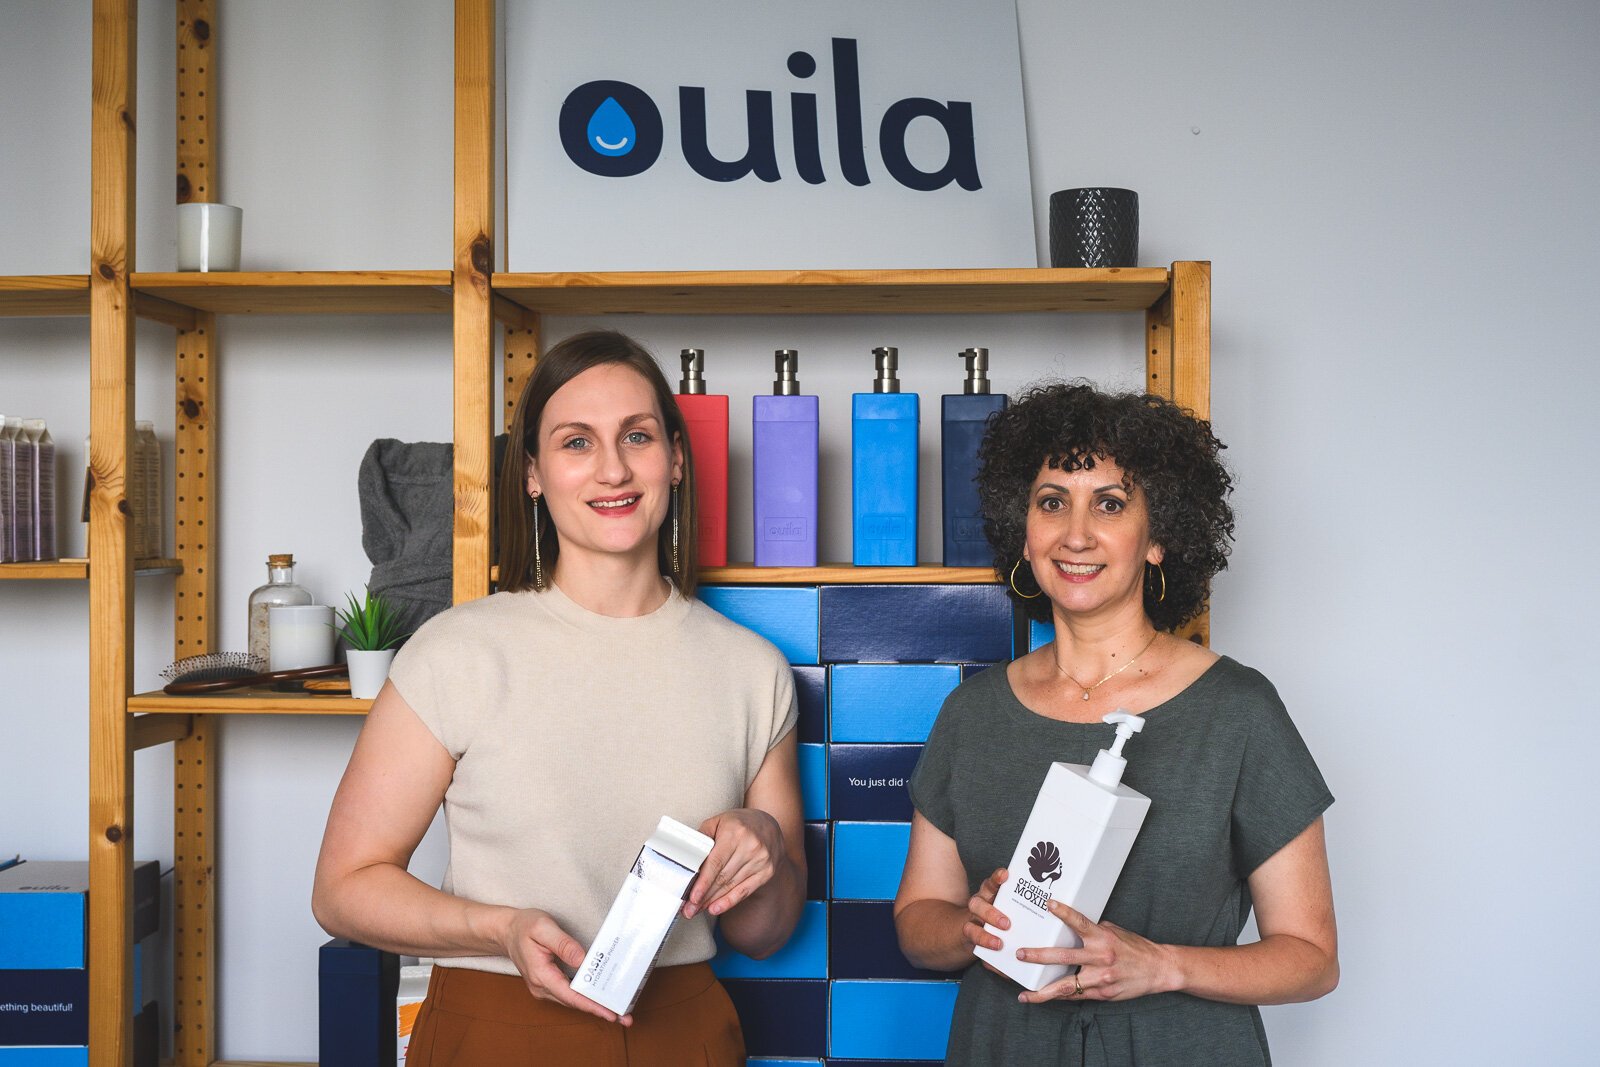 Dawn Marentay and Rachel Blistein at Ouila's facilities in Whitmore Lake.